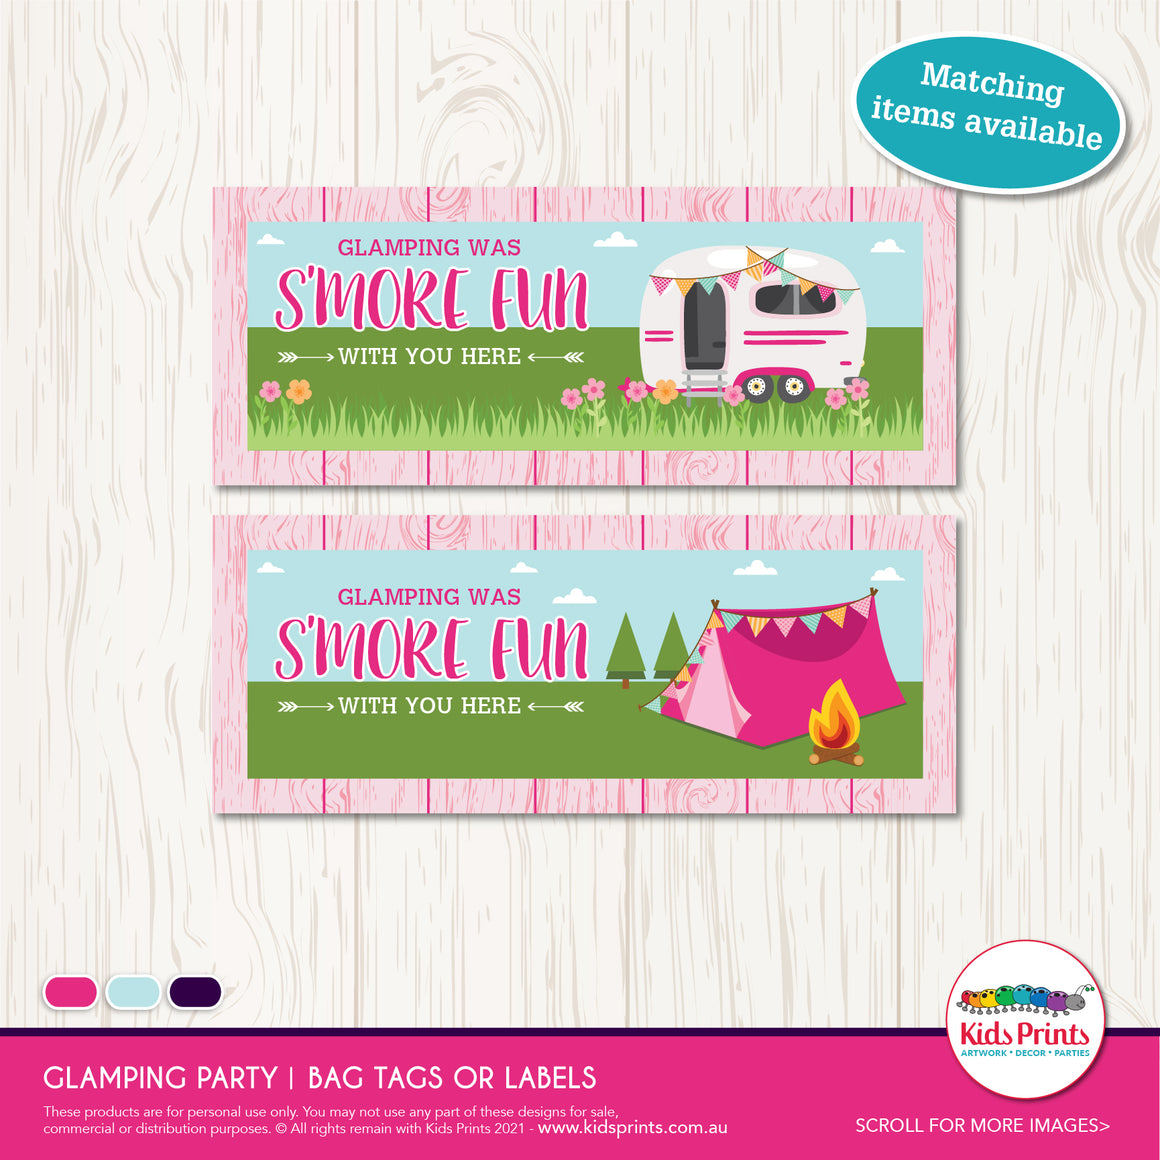 Glamping Party | S'more Bag Tag - Kids Prints